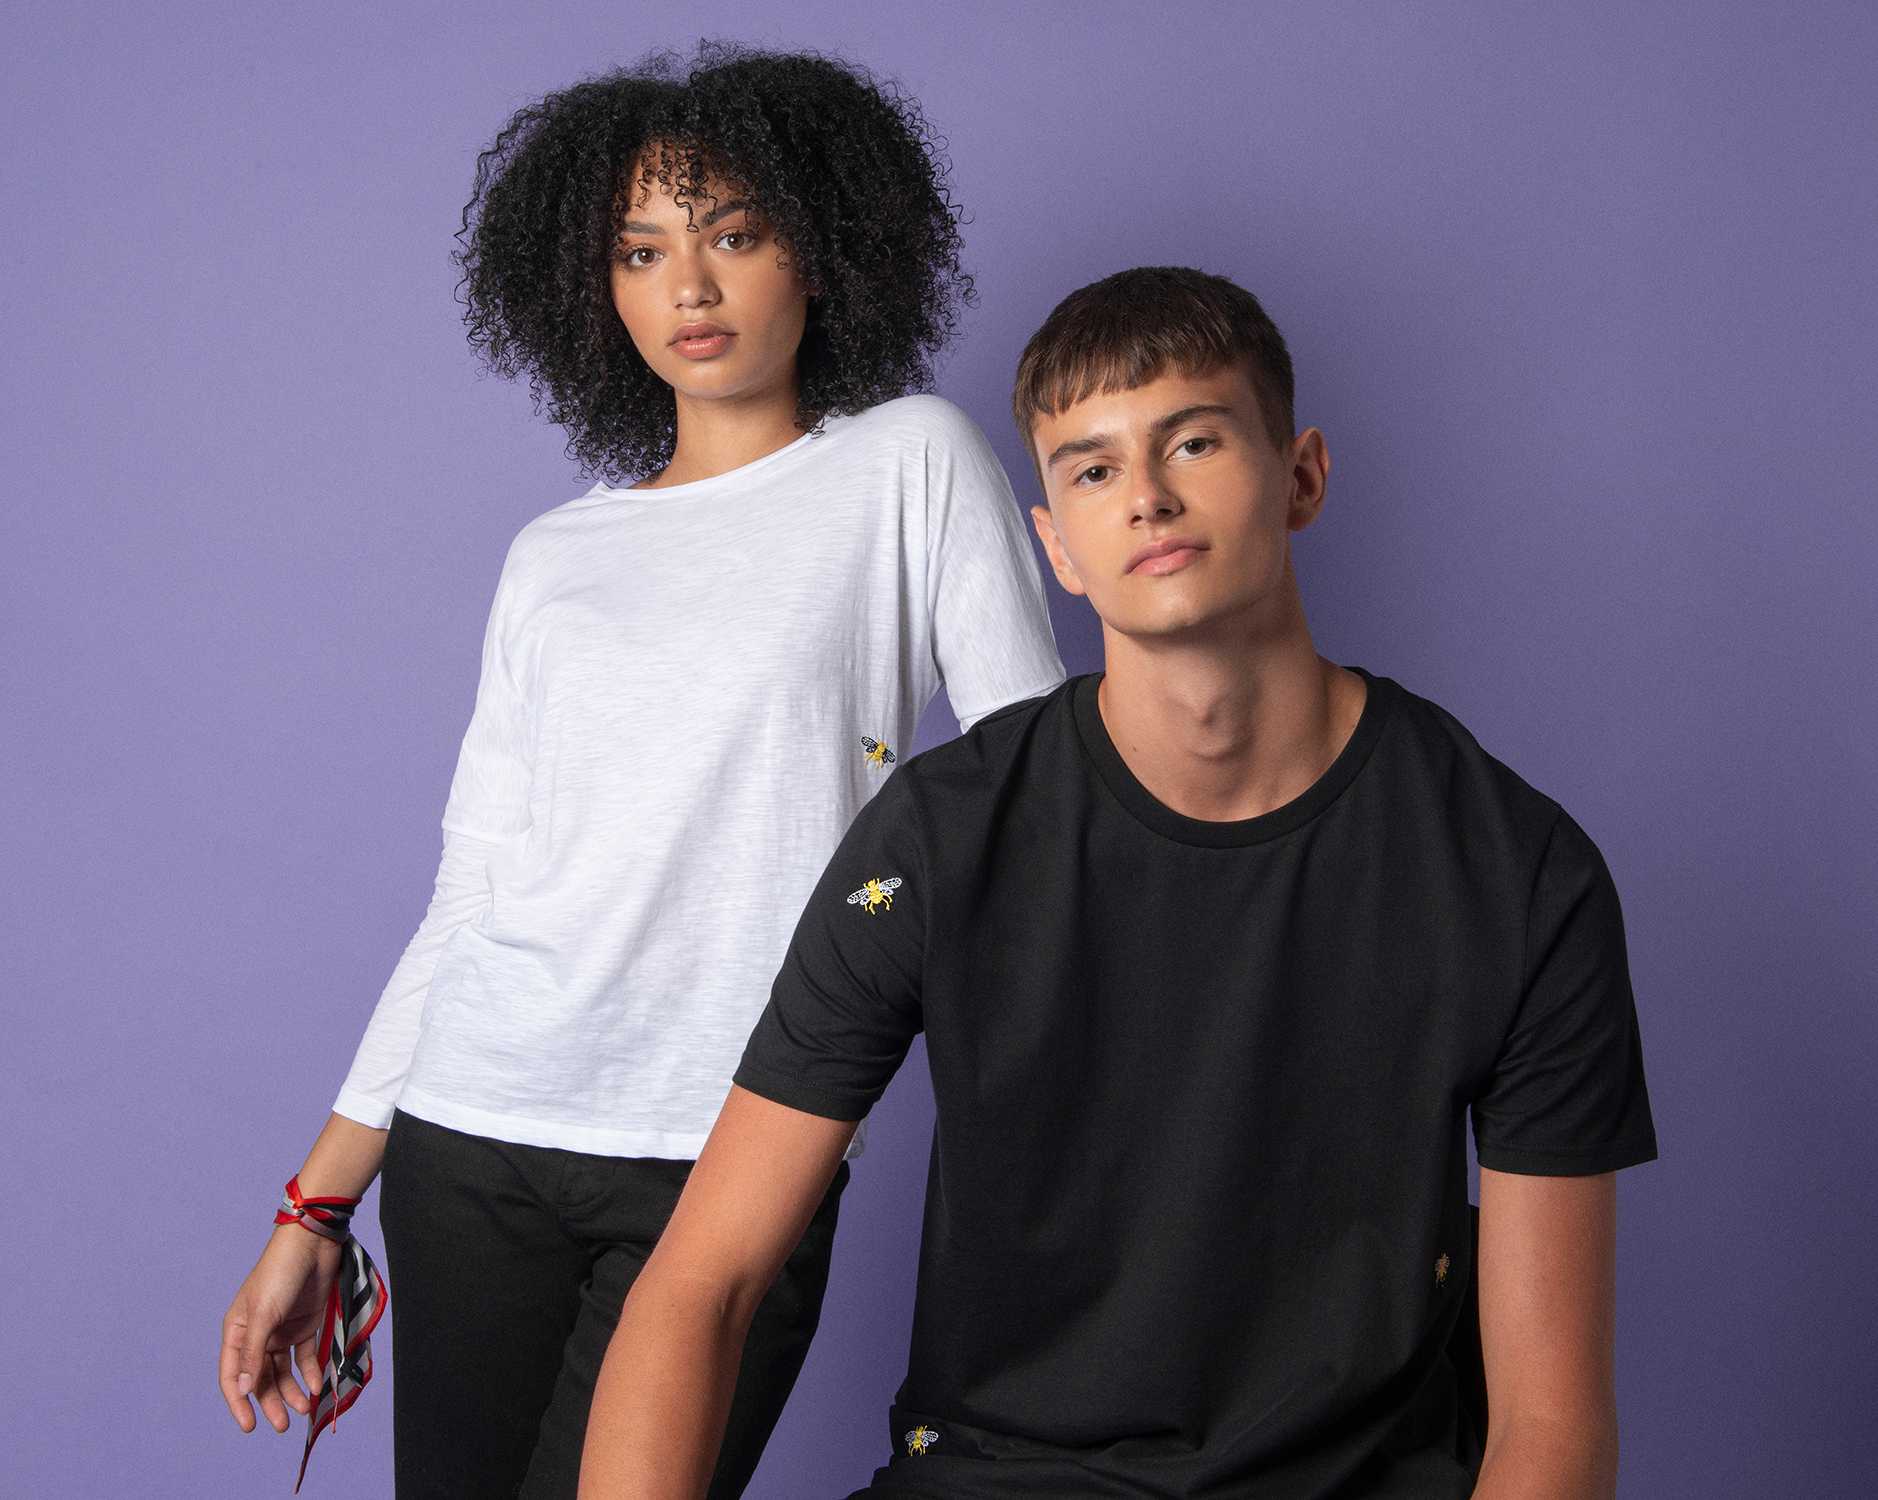 A couple is standing together infront of a purple backdrop wearing monocrome tops with embroideries 